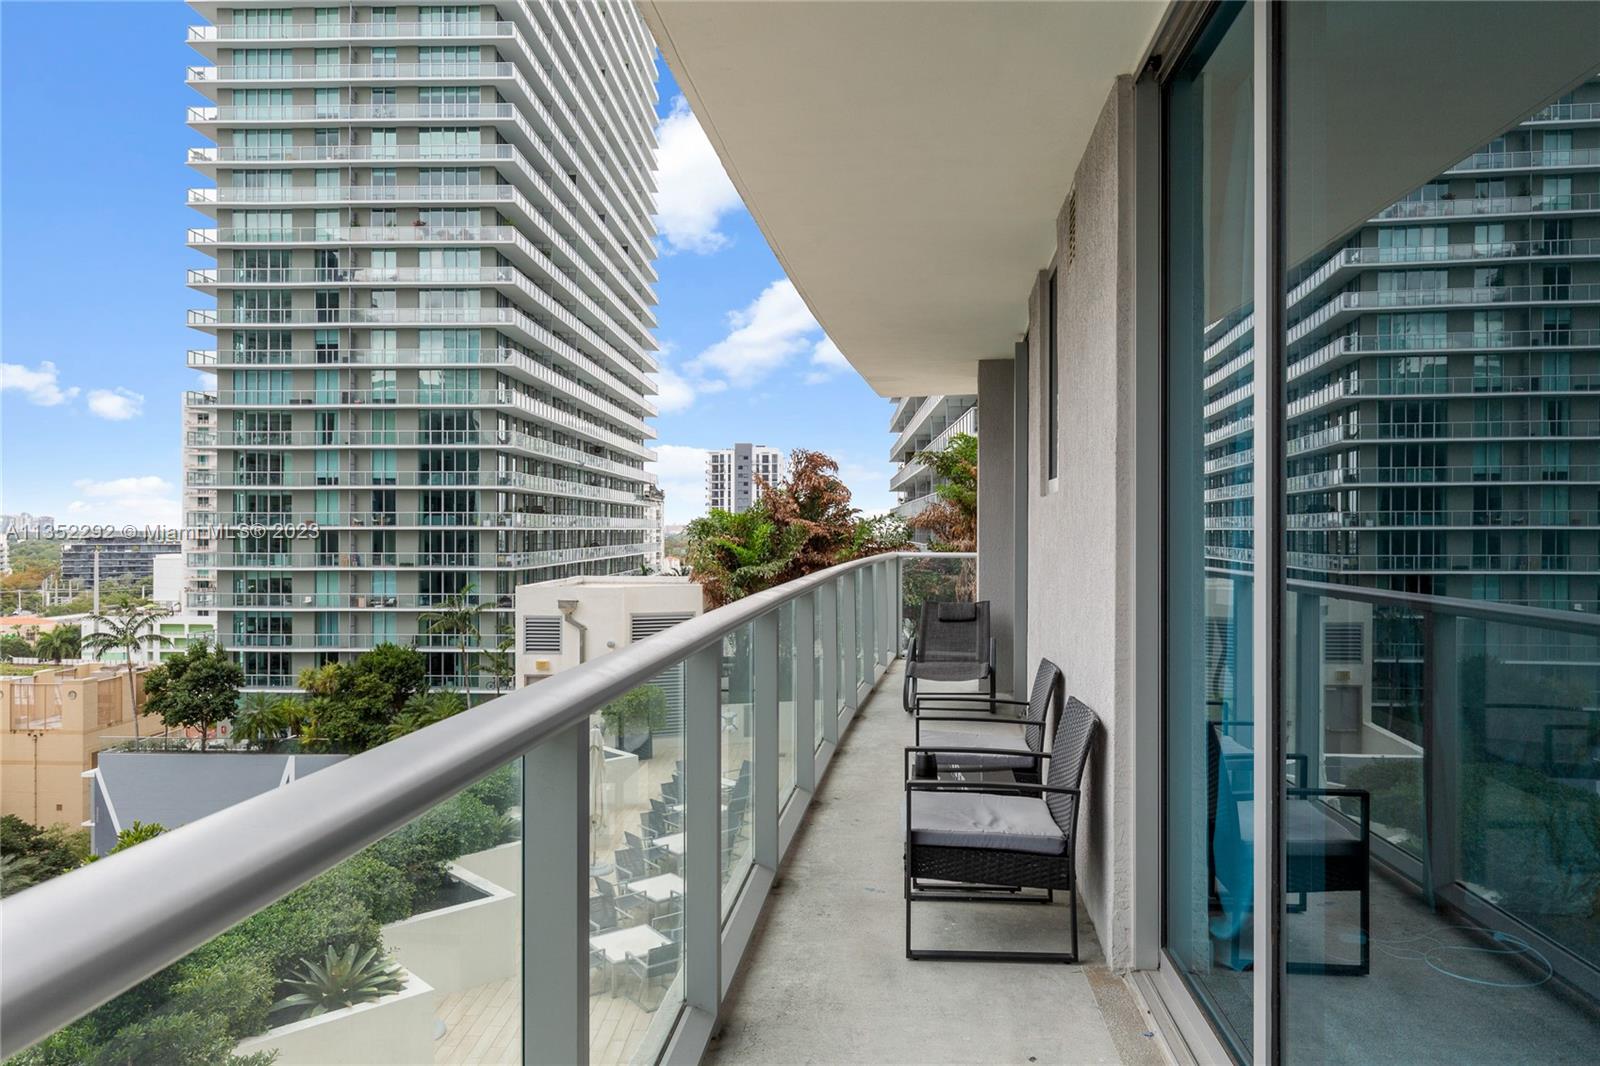 Millecento is an exceptional residential building located in the heart of Brickell. This stunning corner unit features 2 bedrooms and 2 bathrooms, with a gorgeous city view. Inside, you will find top-of-the-line stainless steel appliances, as well as an in-unit washer and dryer for your convenience. The imported stone countertops and contemporary Italian cabinetry lend a touch of elegance to this modern space. The floor-to-ceiling glass windows allow for plenty of natural light and provide a breathtaking view of the city. Enjoy a morning coffee or an evening cocktail on your private balcony with glass railings. Millecento offers residents a vast array of world-class amenities that will keep you entertained and relaxed.